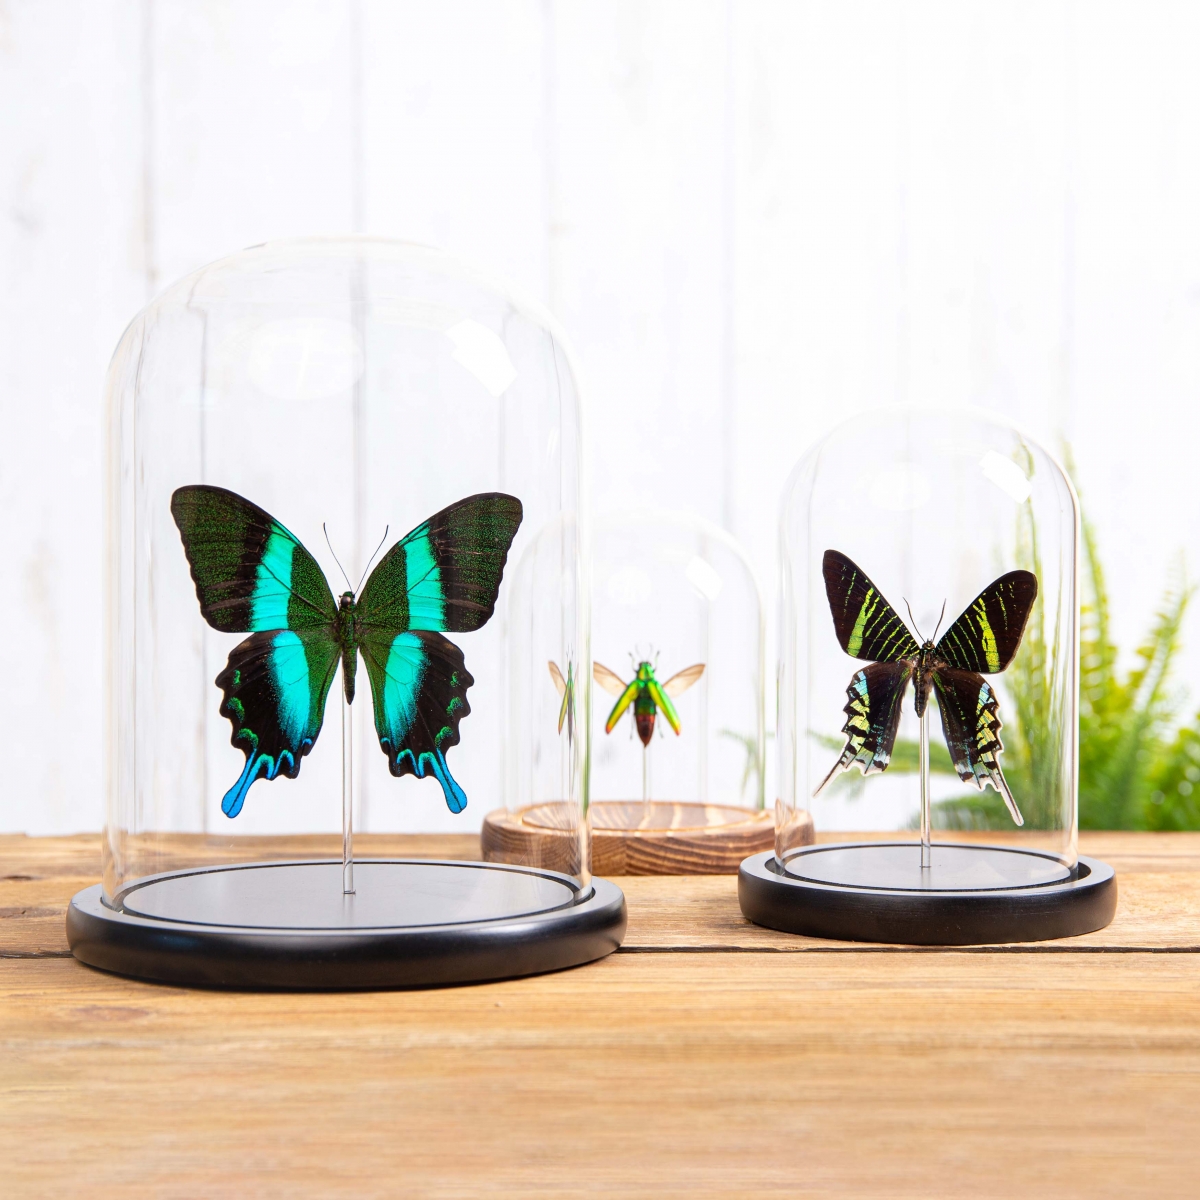 Blue Morpho Butterfly in Glass Dome with Wooden Base (Morpho didius)